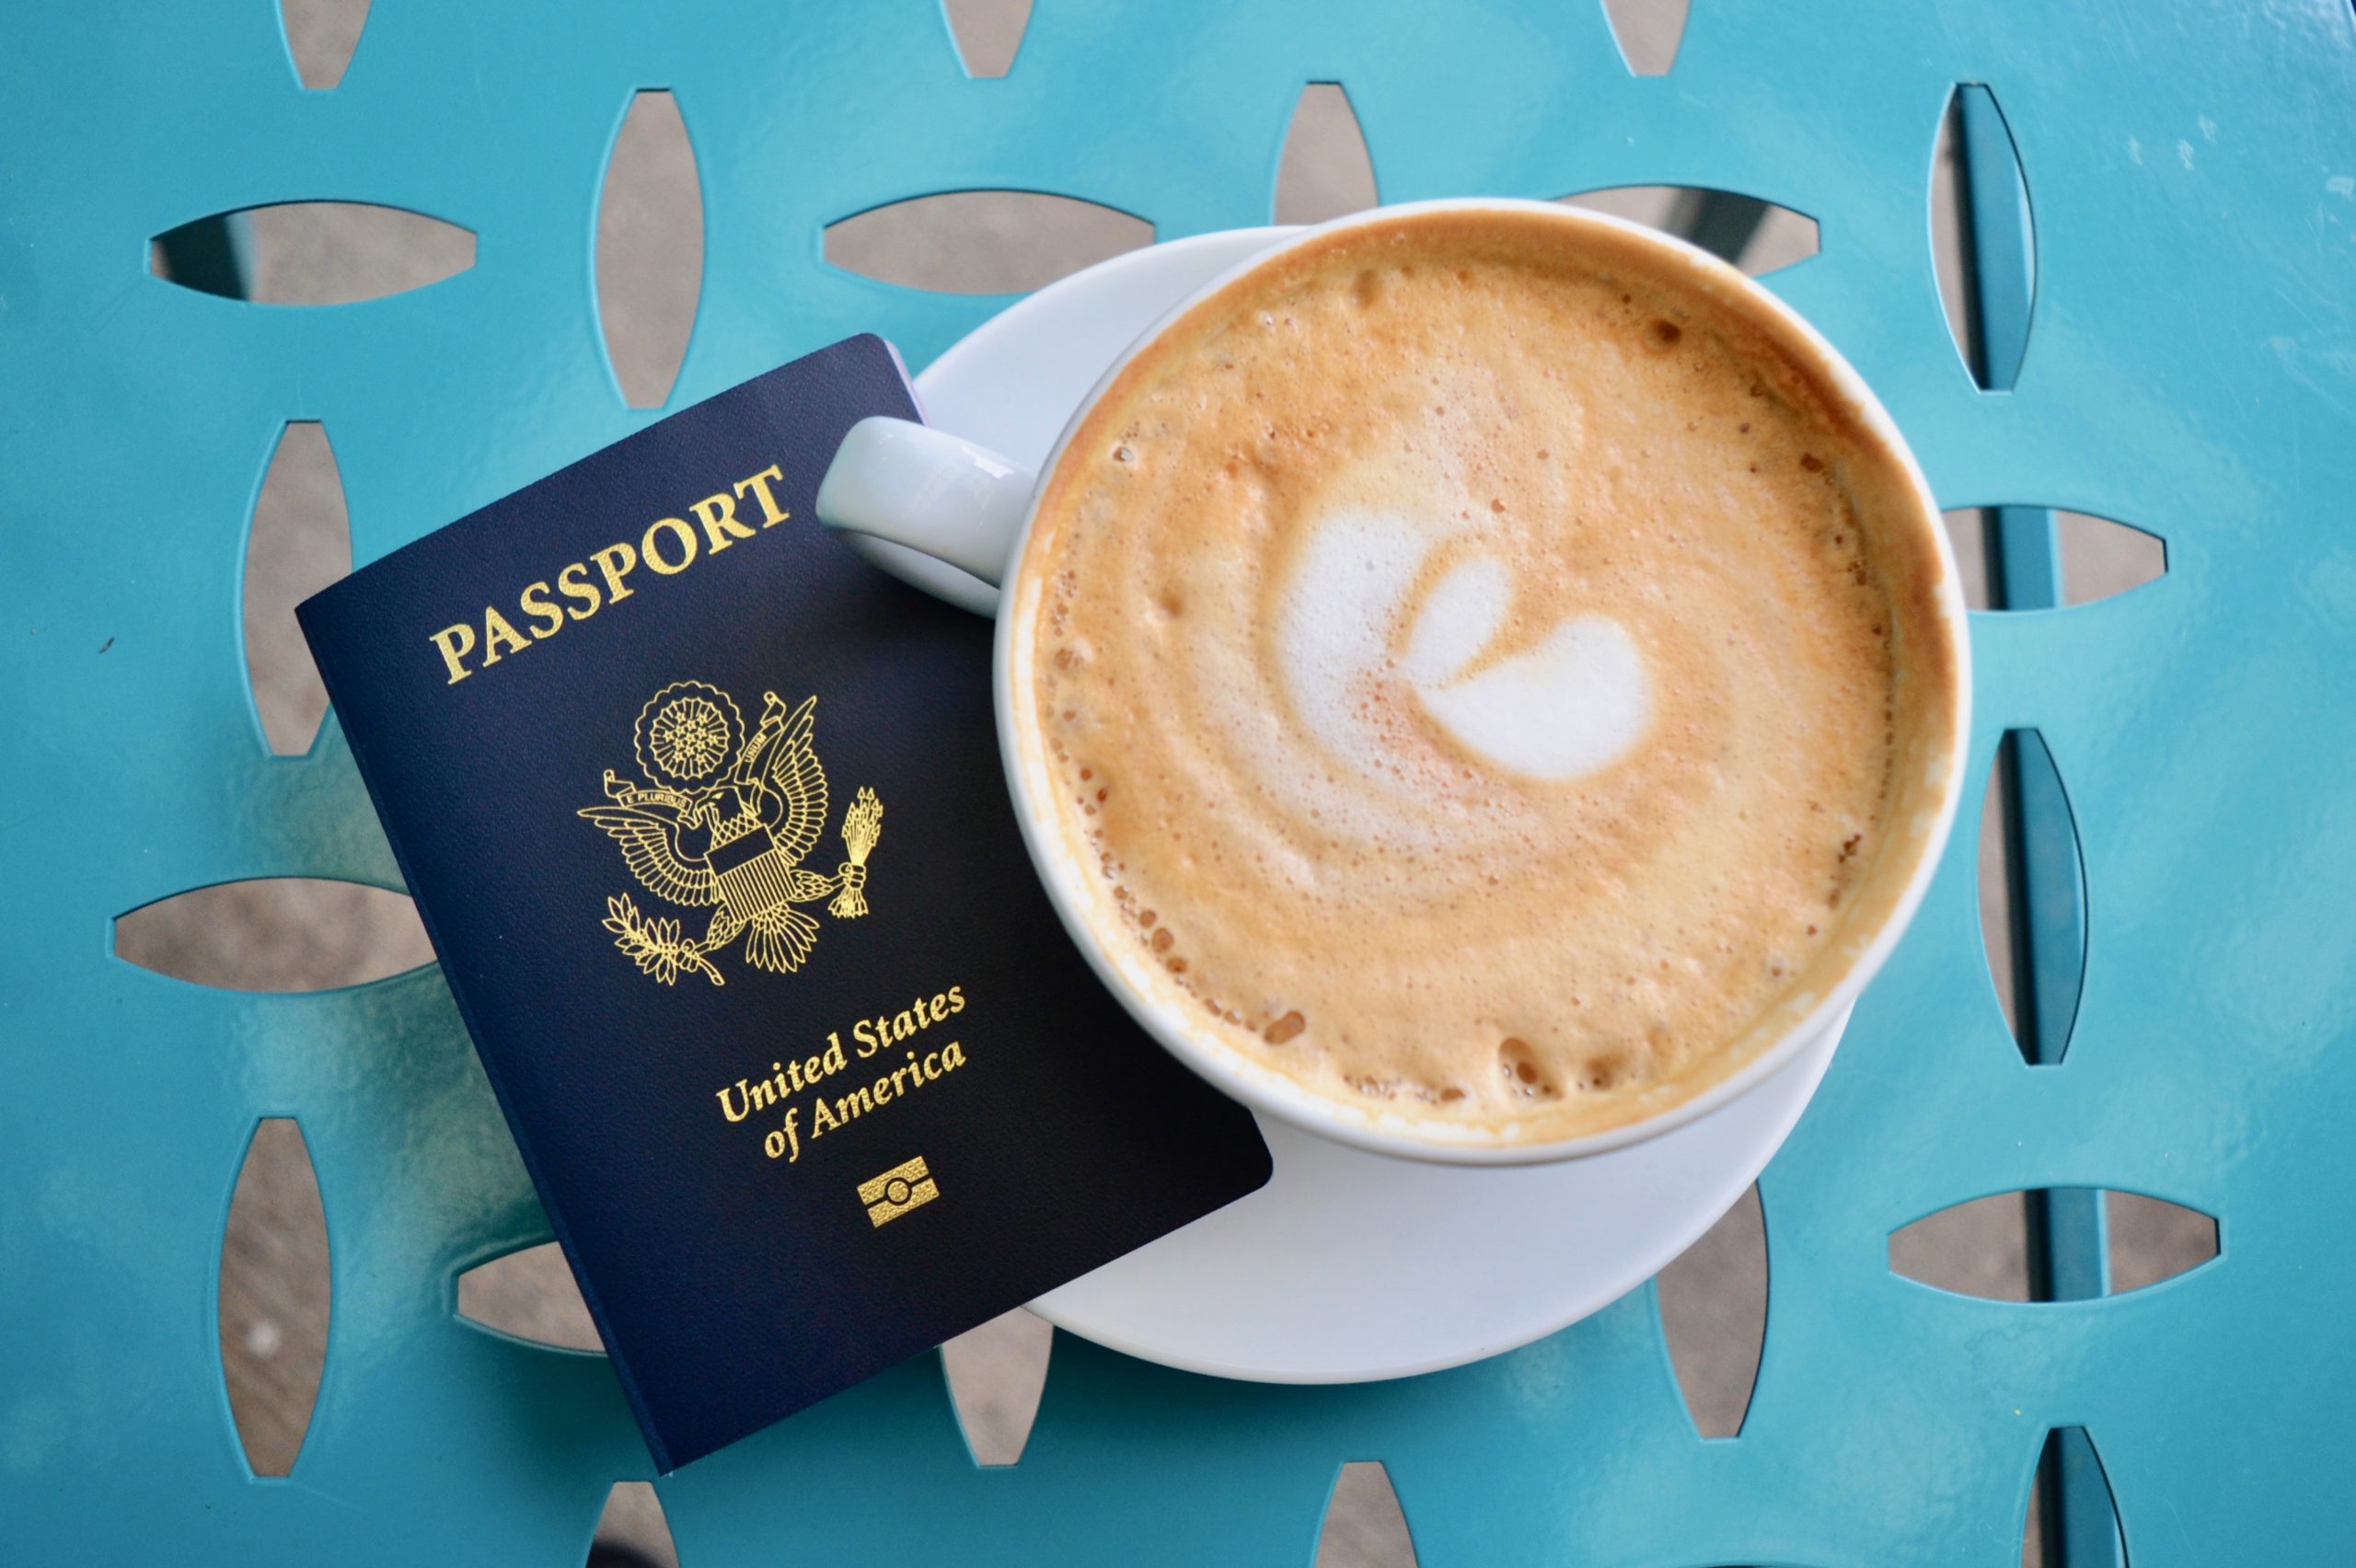 Passports and Cappuccinos